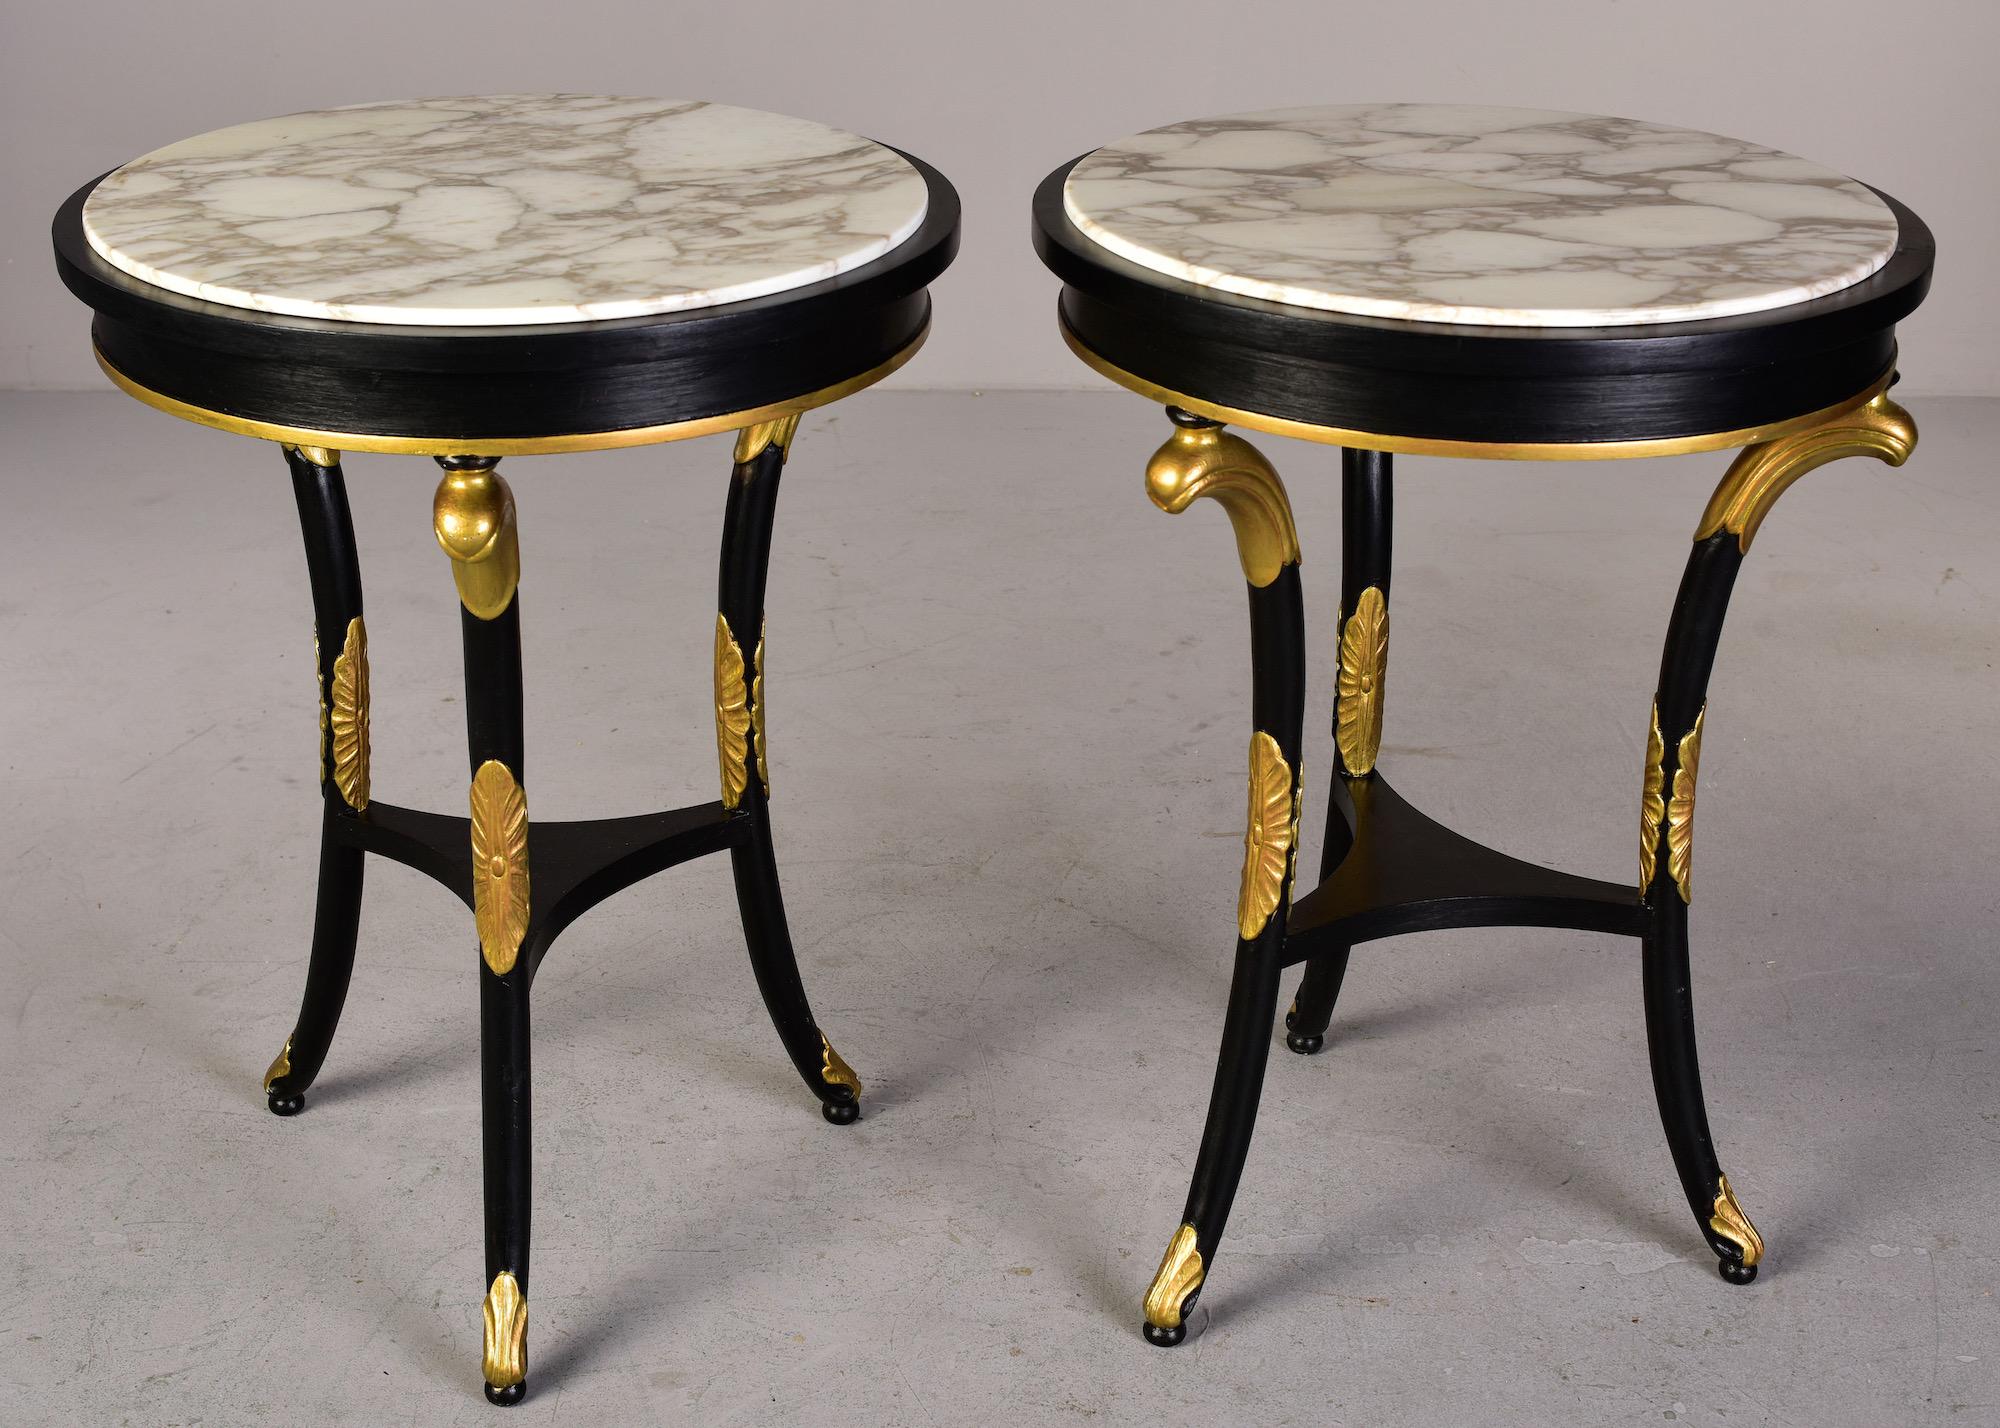 Pair Late 19th C Regency Ebonised Tables with Gilt Wood Fittings and Marble Tops For Sale 5